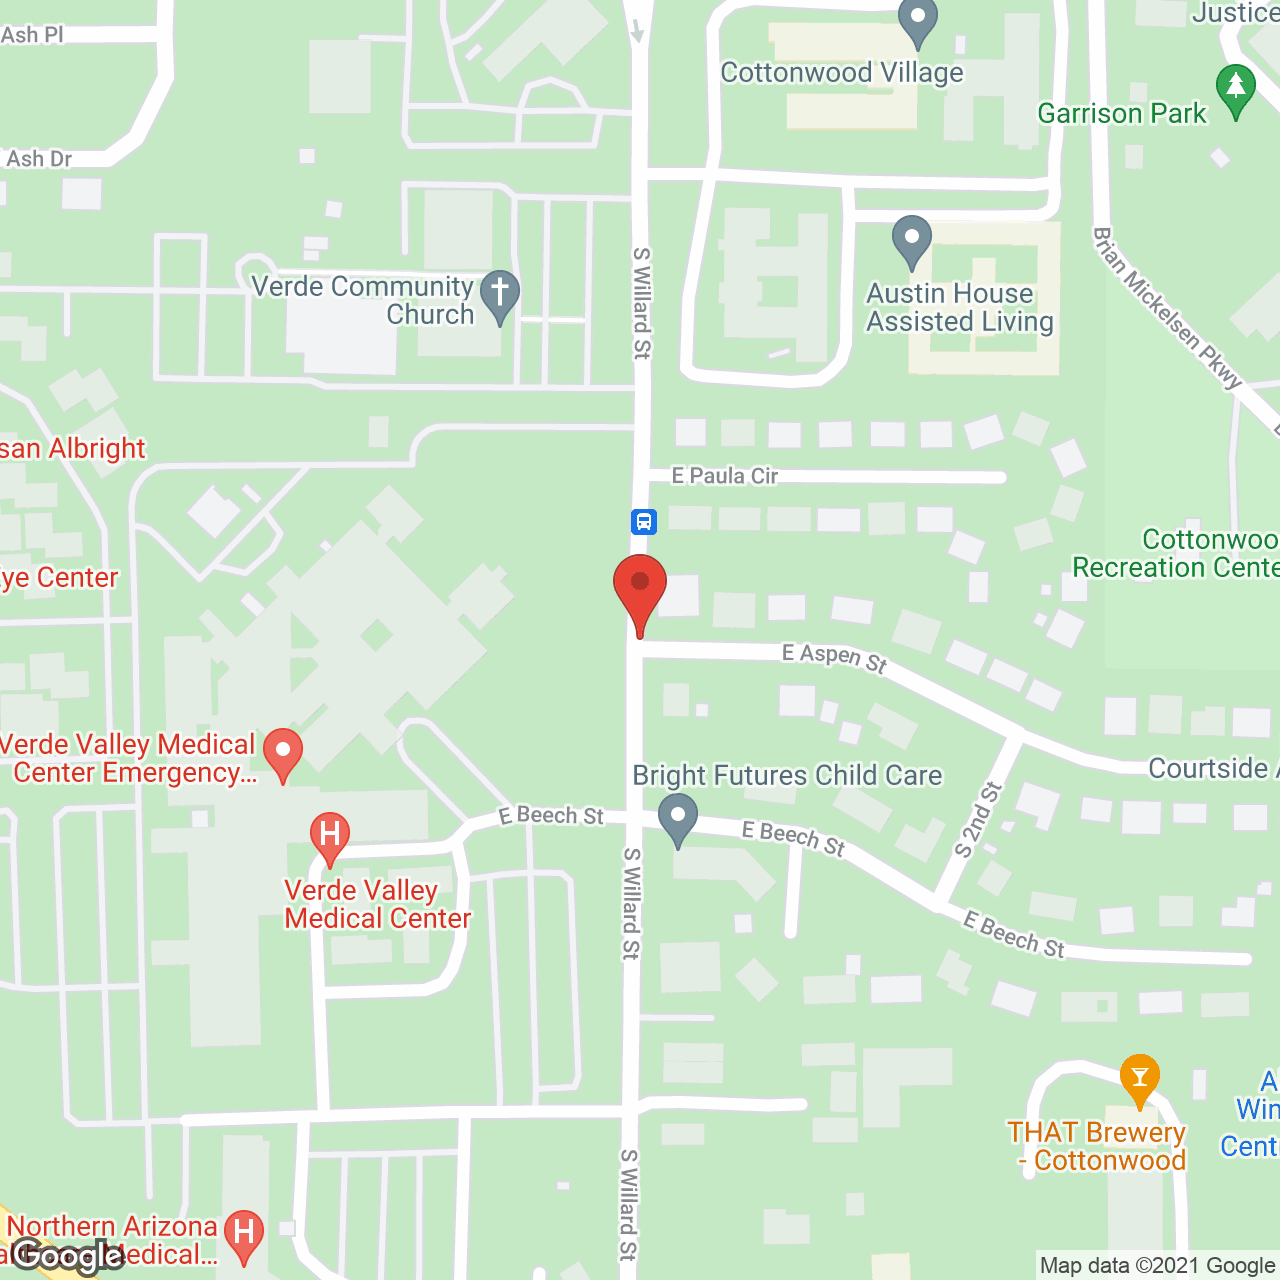 Austin House Assisted Living in google map